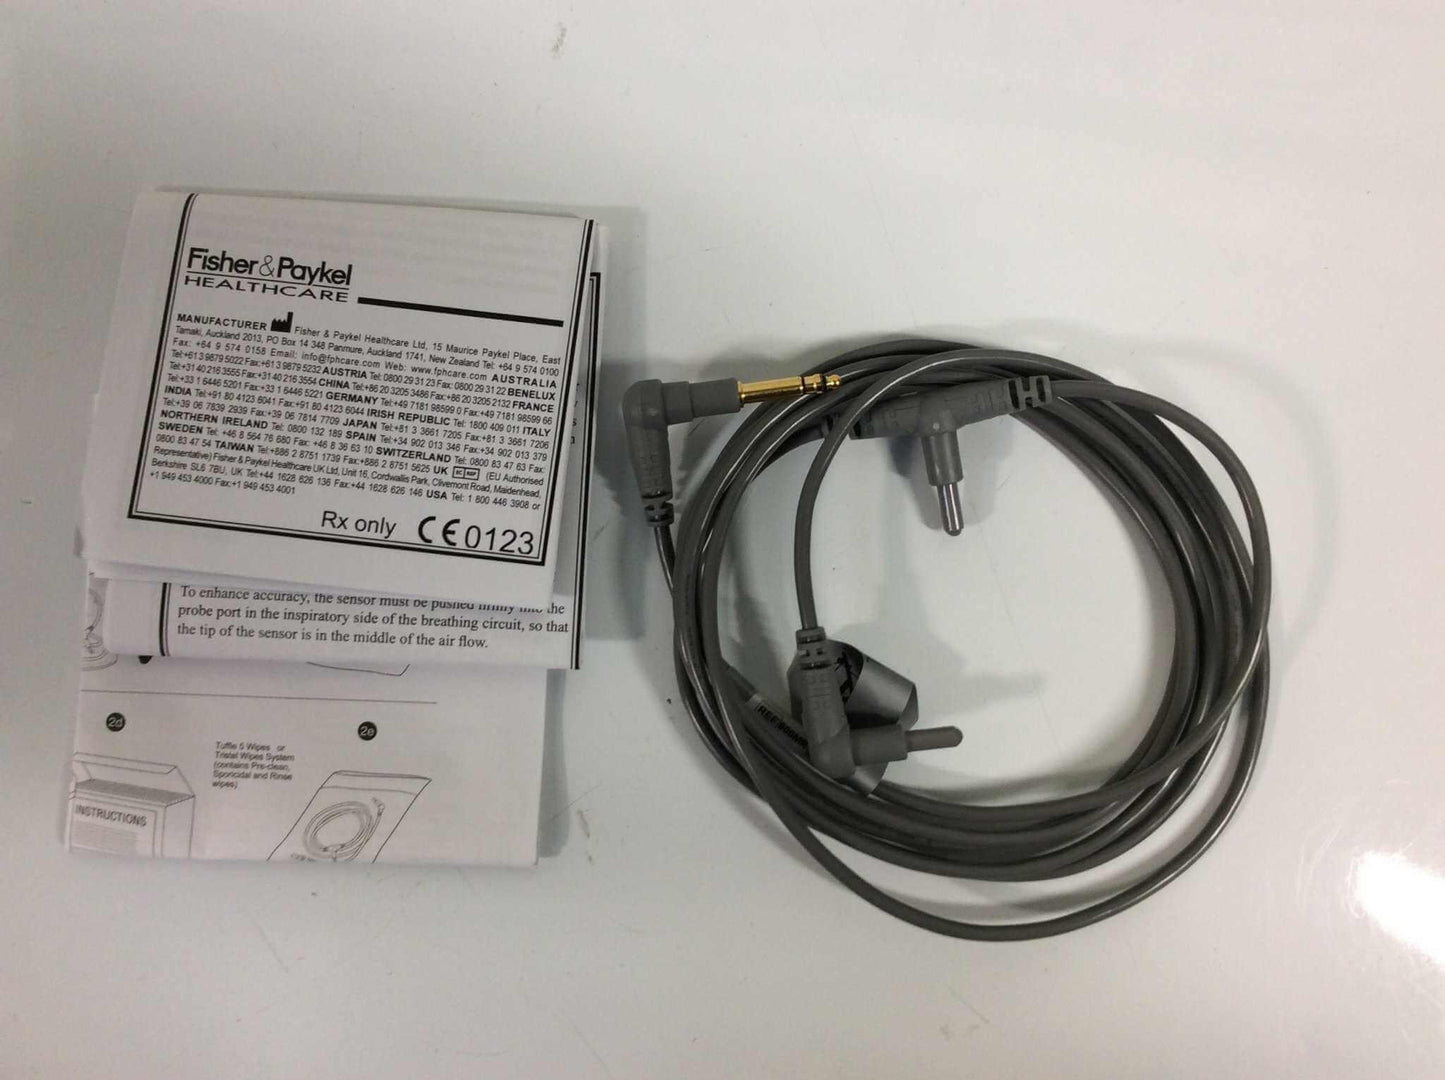 NEW Open Box Fisher & Paykel 900MR561 Airway Temperature Probe Warranty FREE Shipping - MBR Medicals